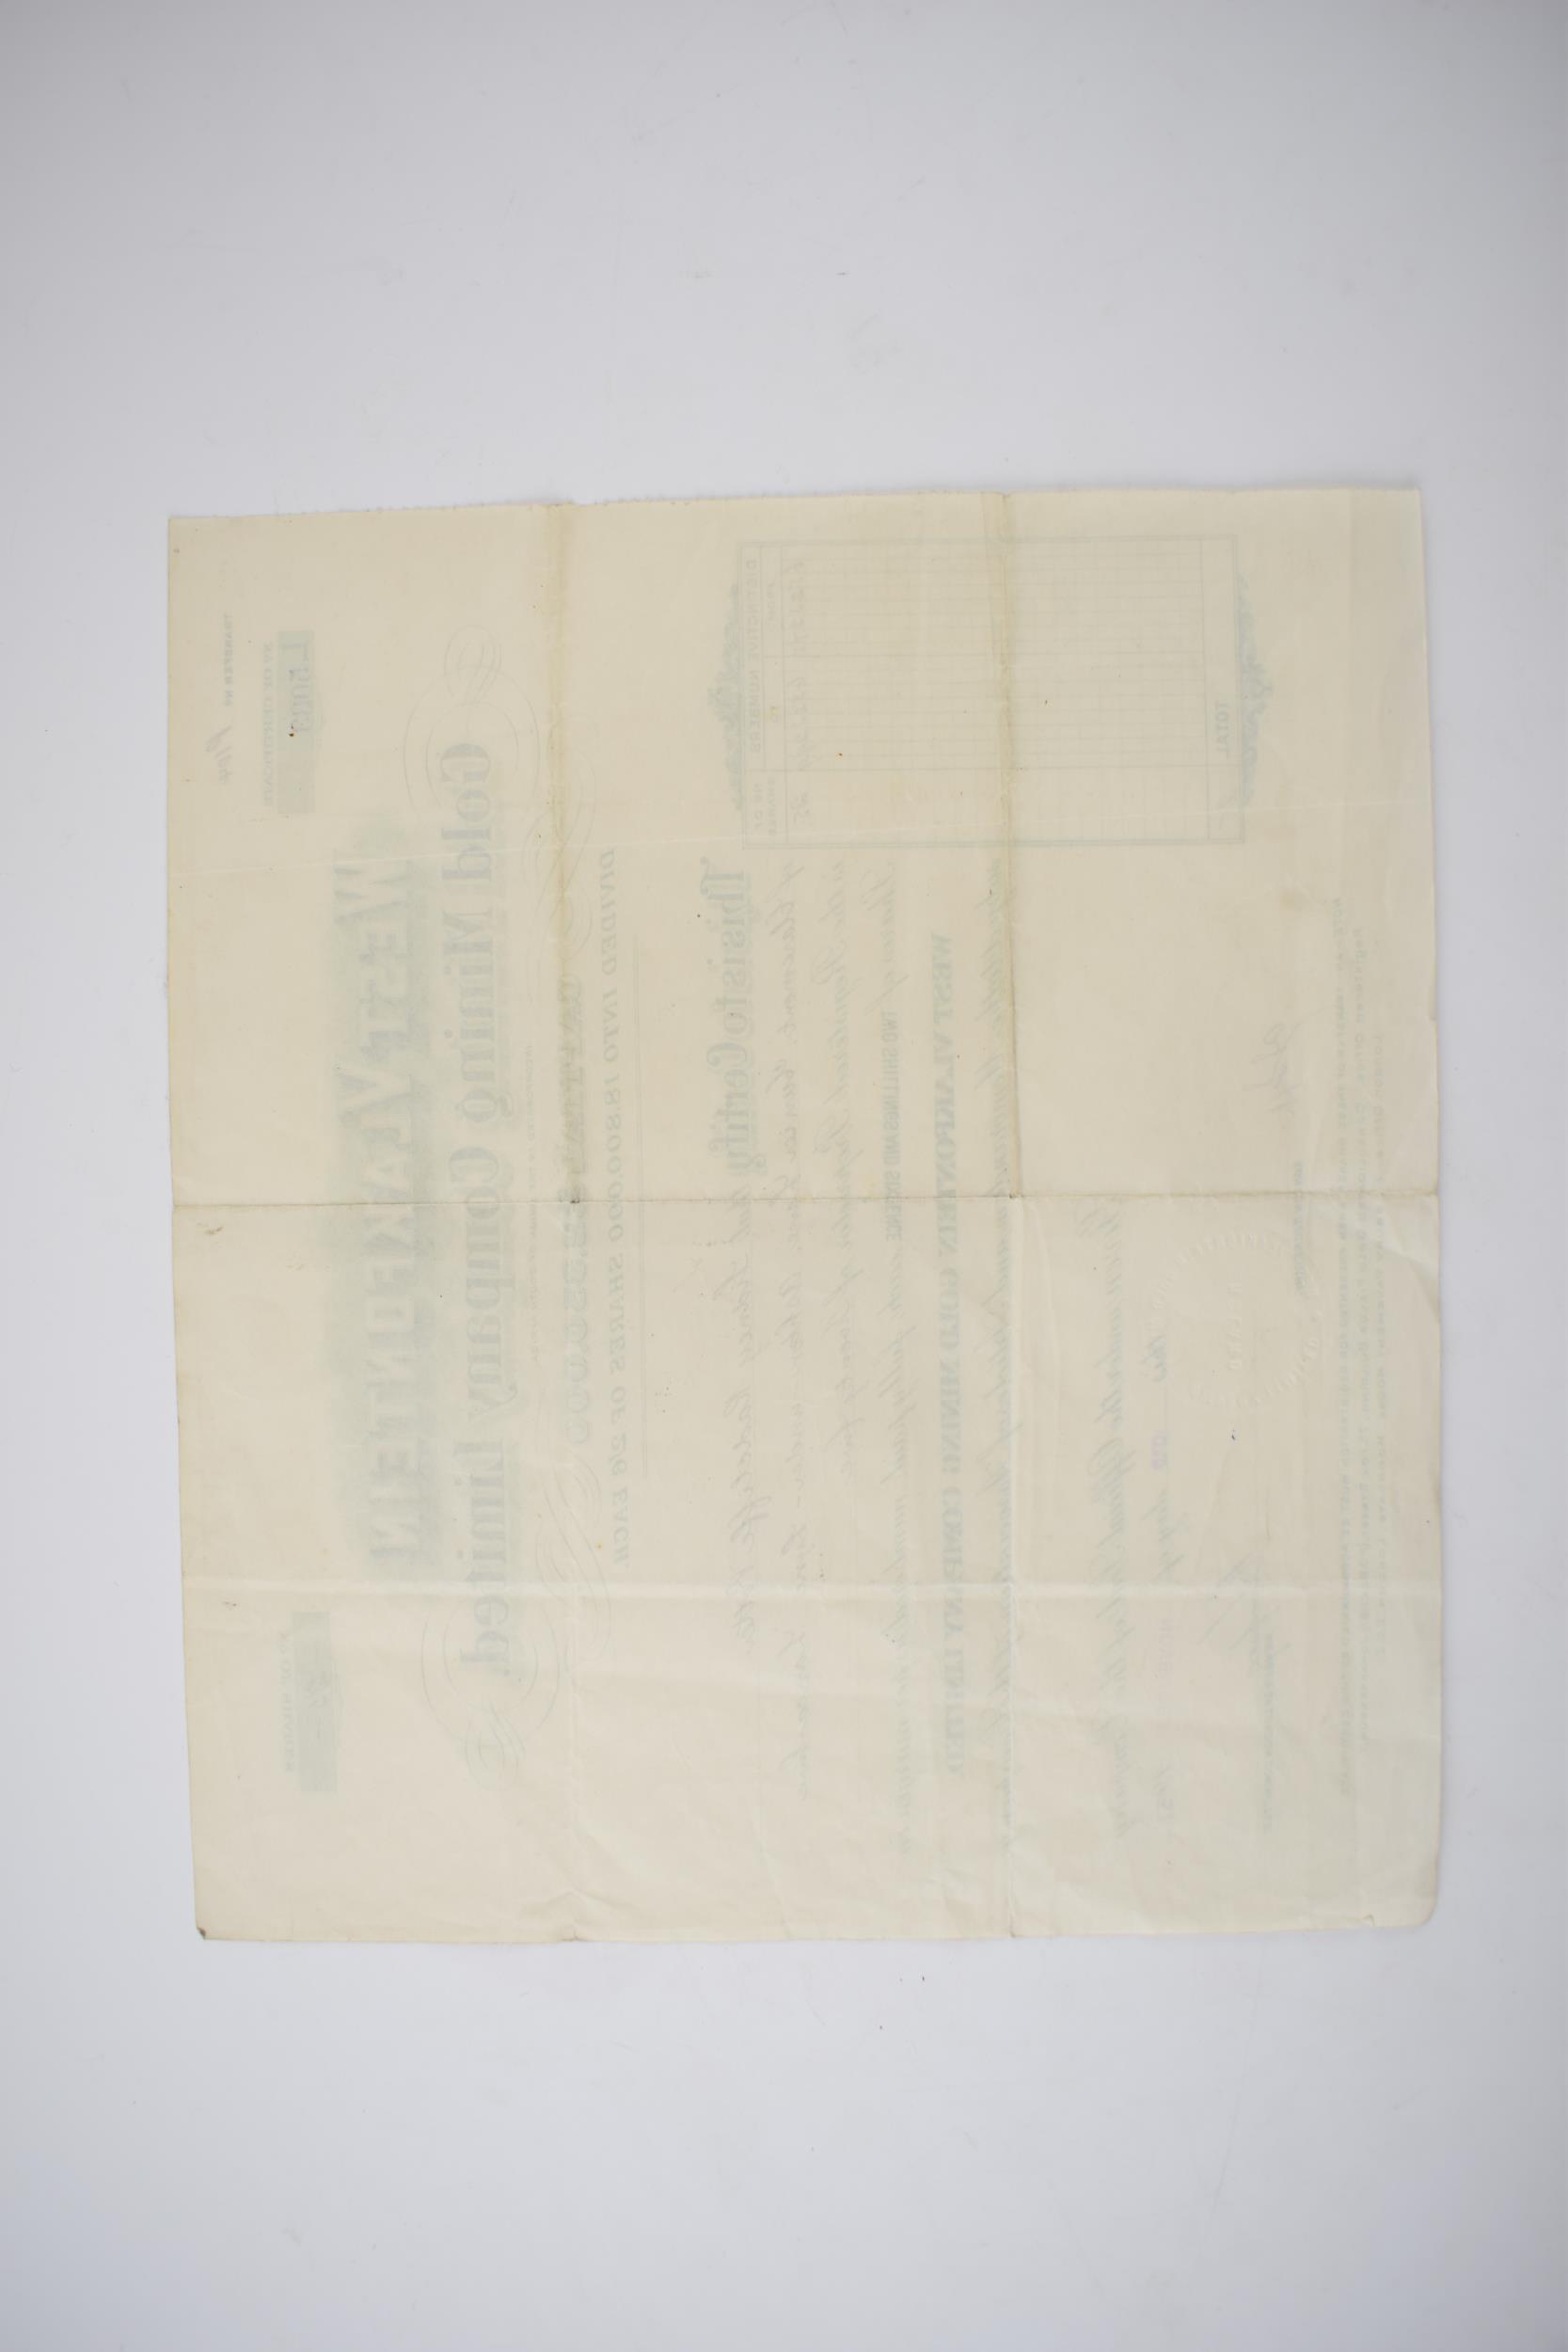 A WEST VLAKFONTEIN Gold Mining Company Limited Shares Certificated dated 10th November 1937. - Image 4 of 4